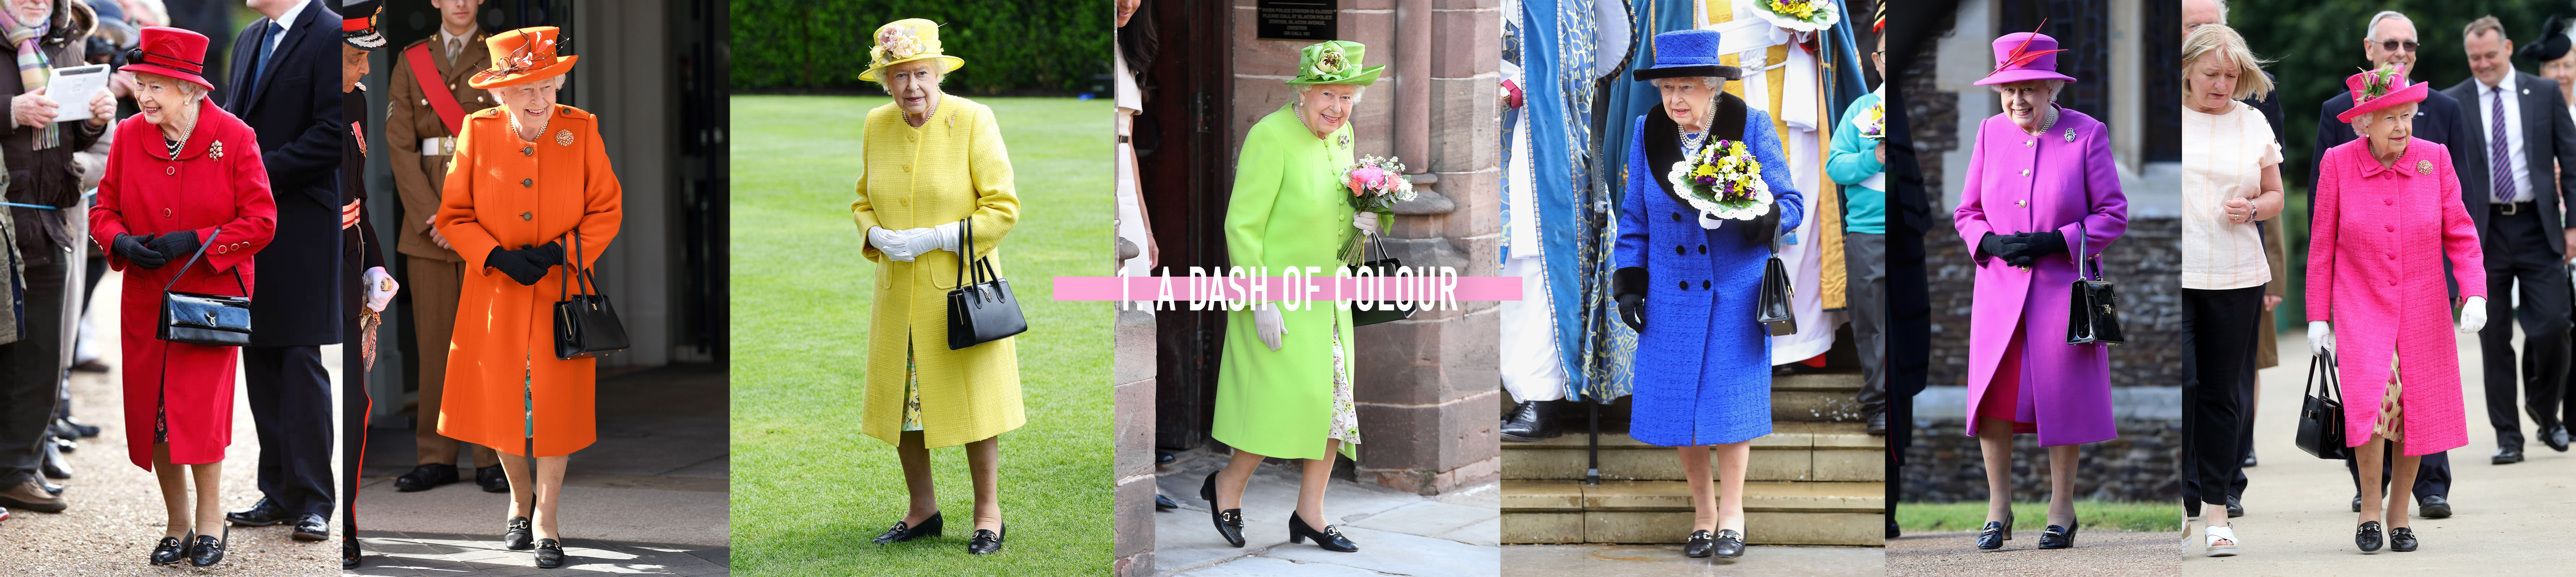 Queen Elizabeth II Platinum Jubilee Fashion 2022 Style Trends Colour Clothing